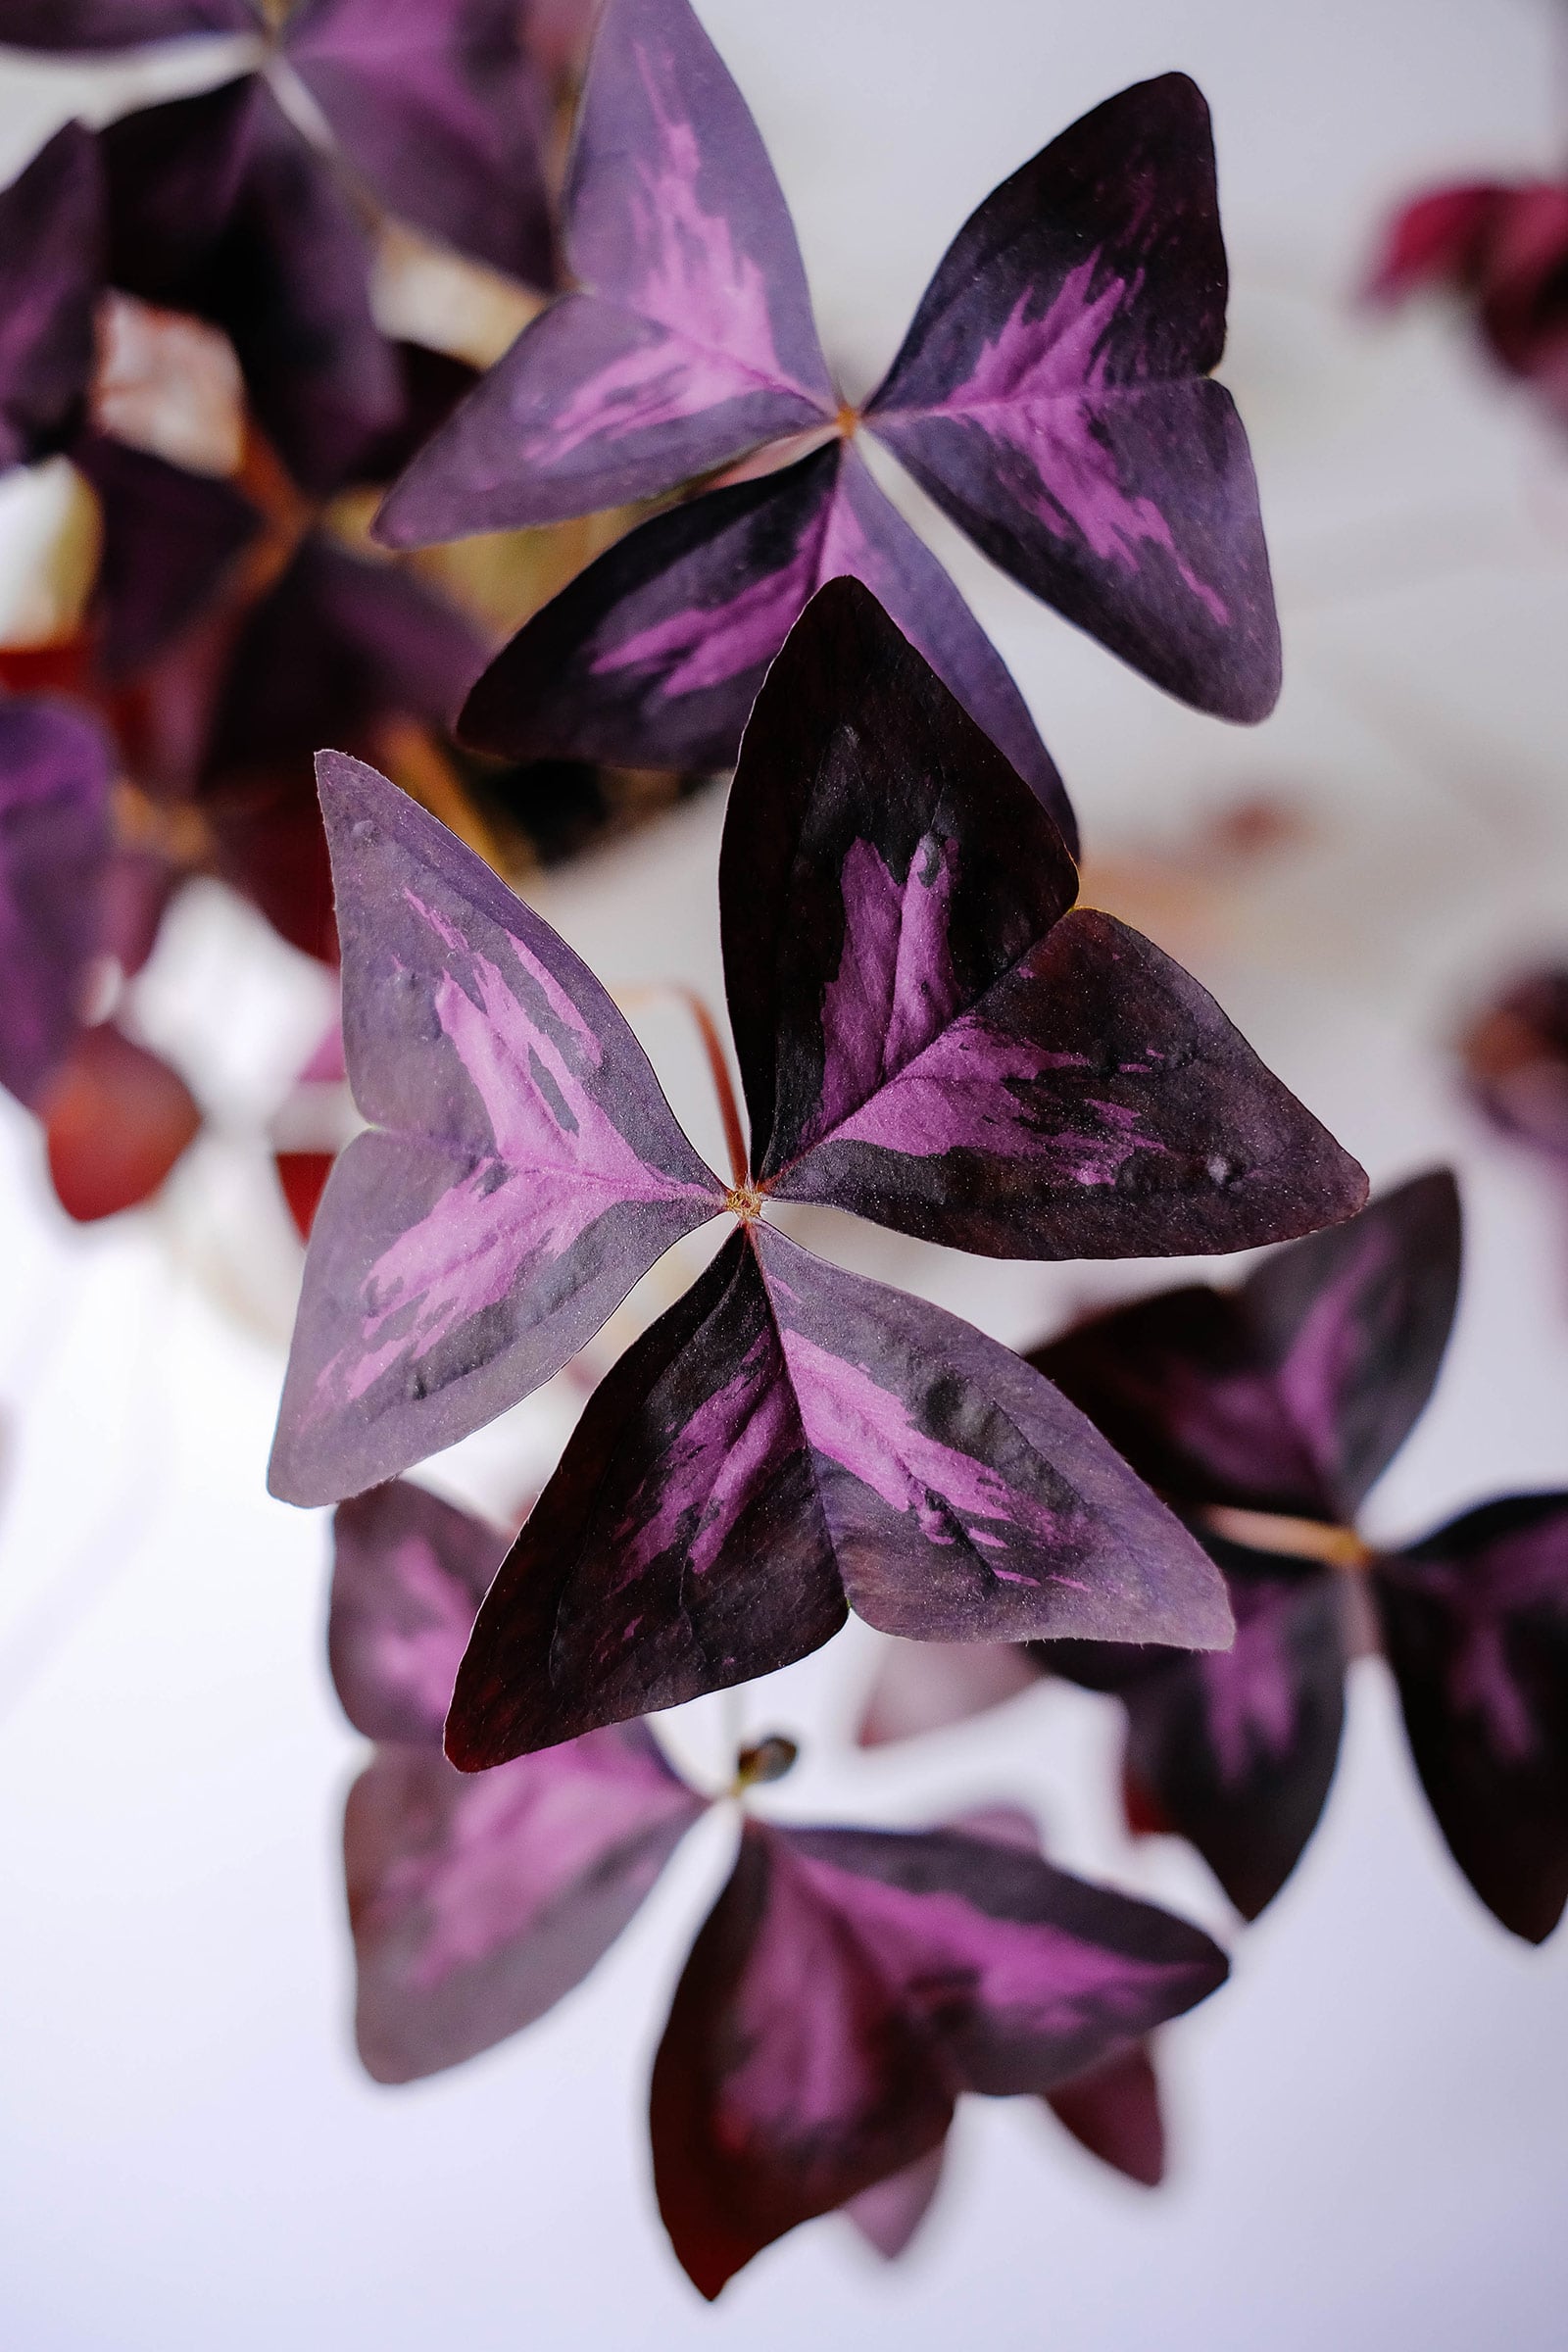 Oxalis triangularis: the last growing guide you'll need for purple shamrock